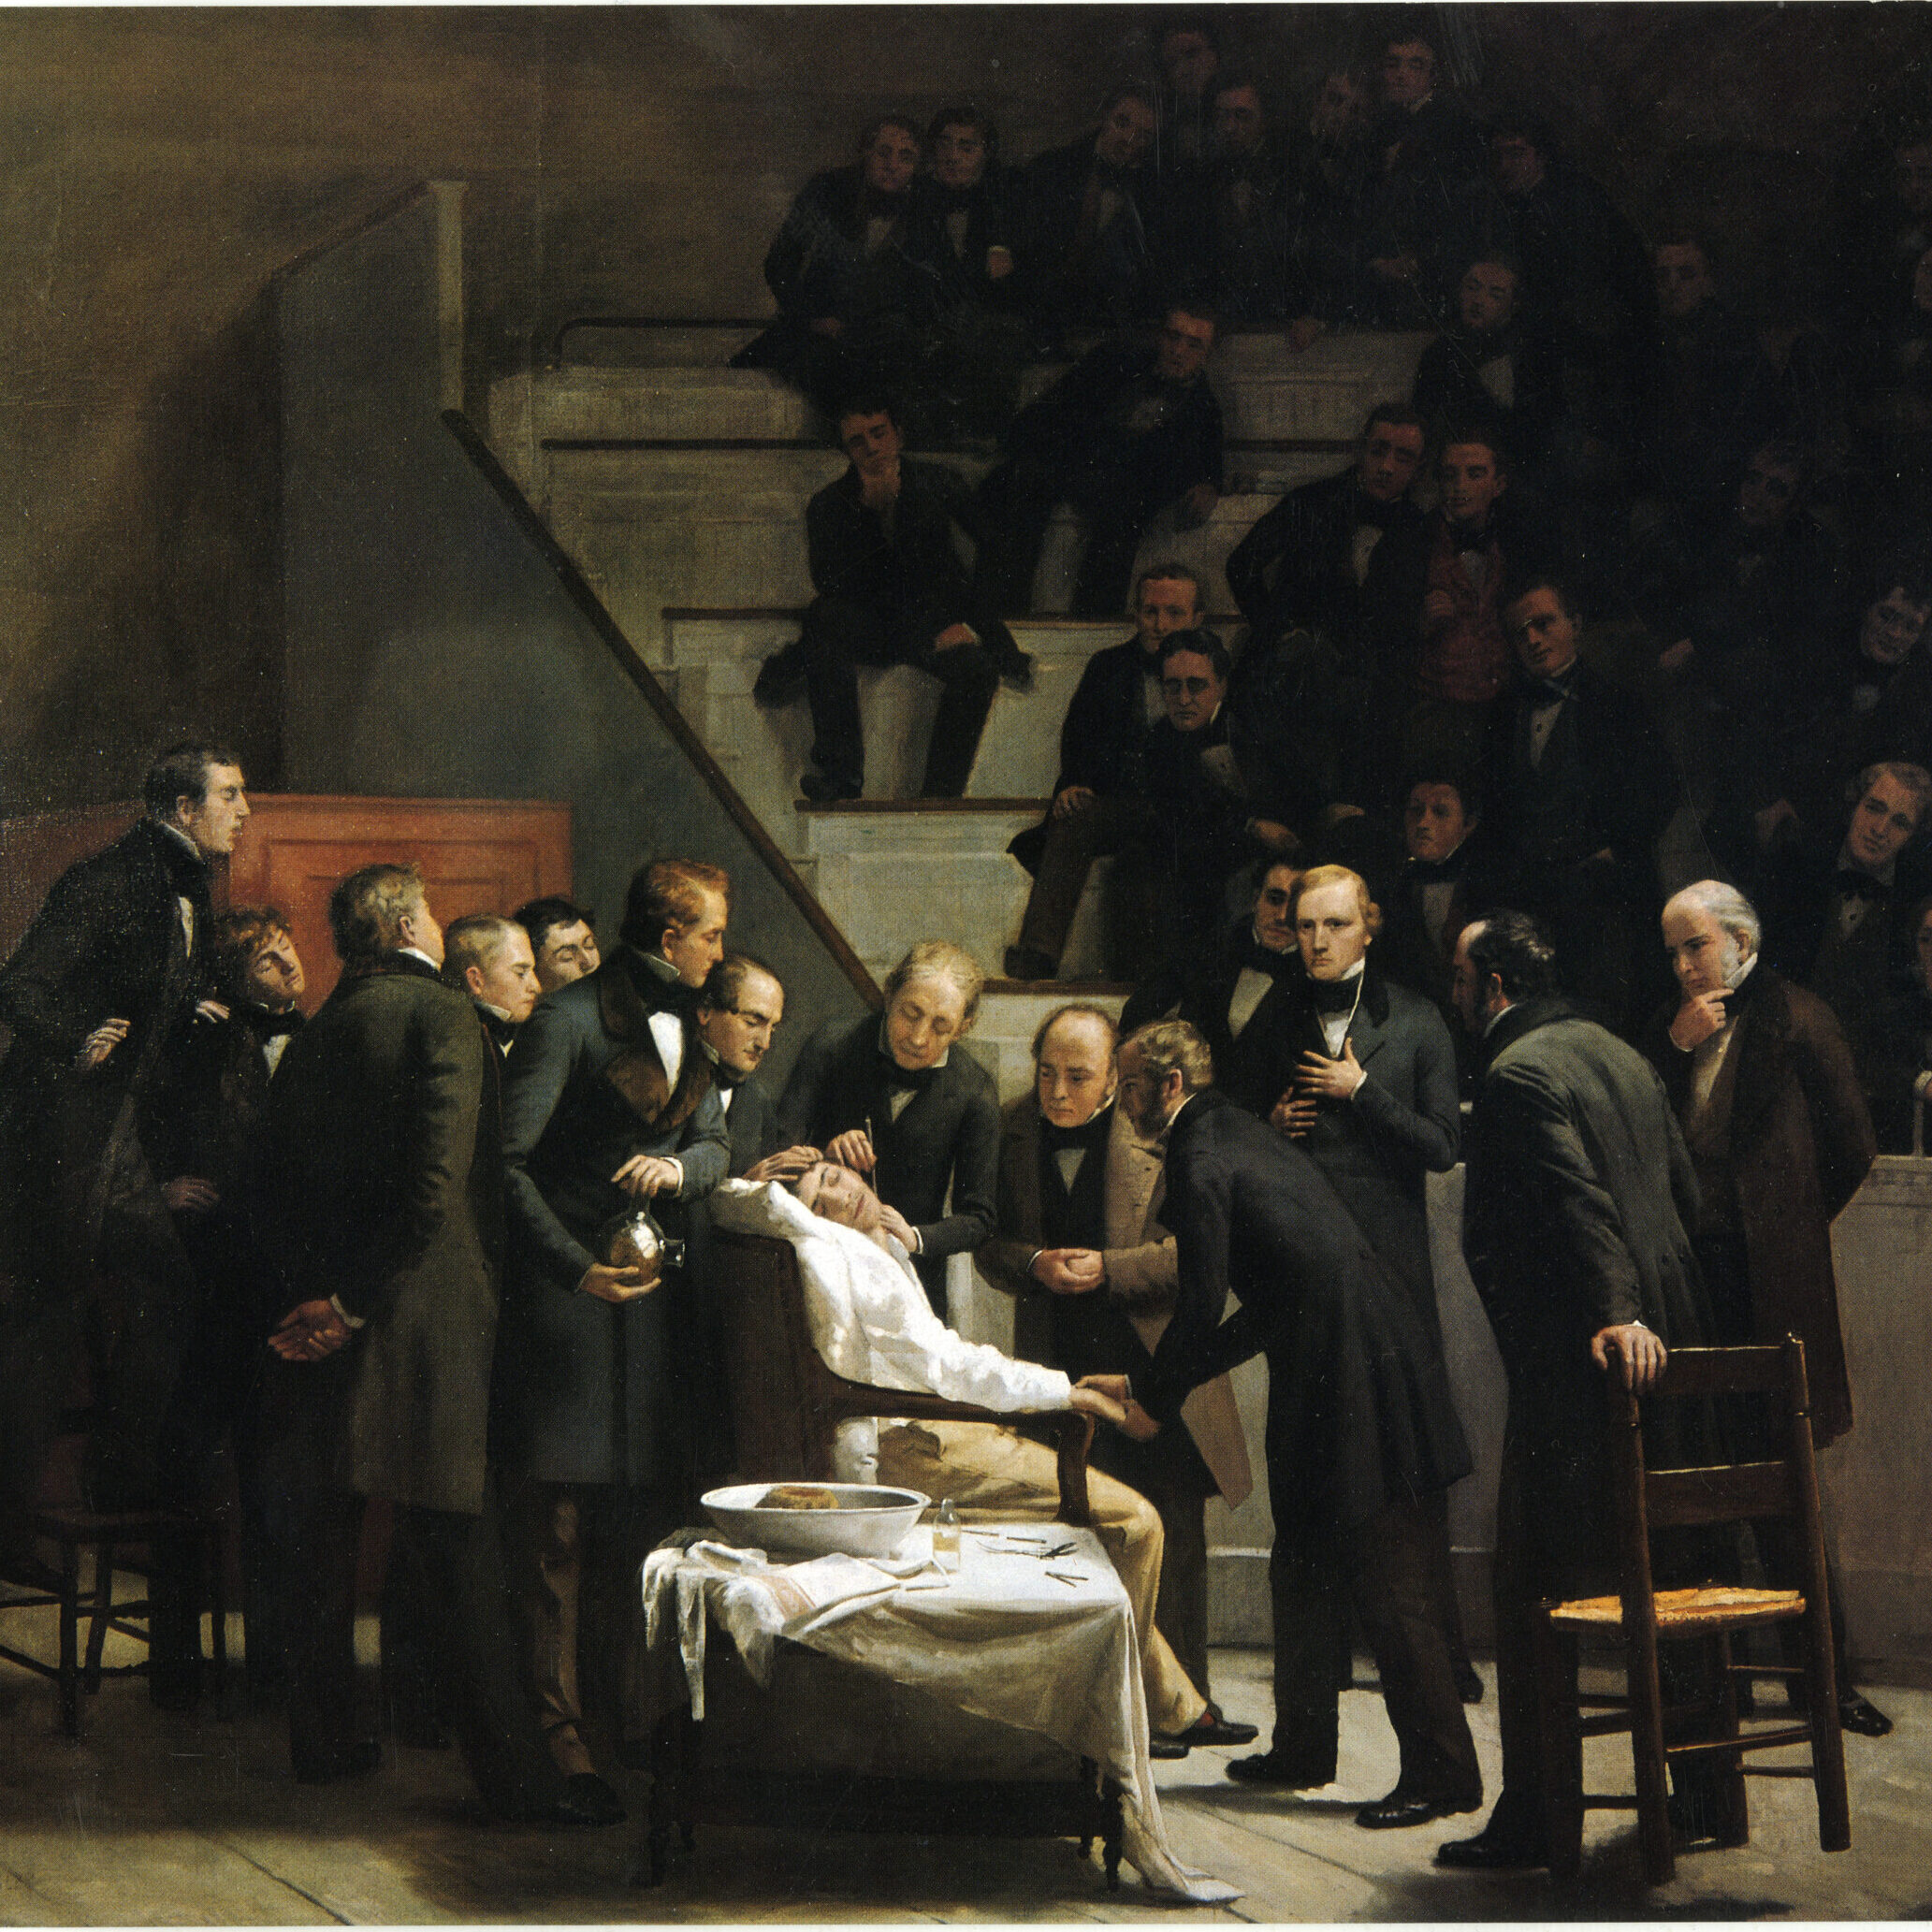 The First Operation Under Ether. Robert Cutler Hinckley (1893). Oil on canvas.